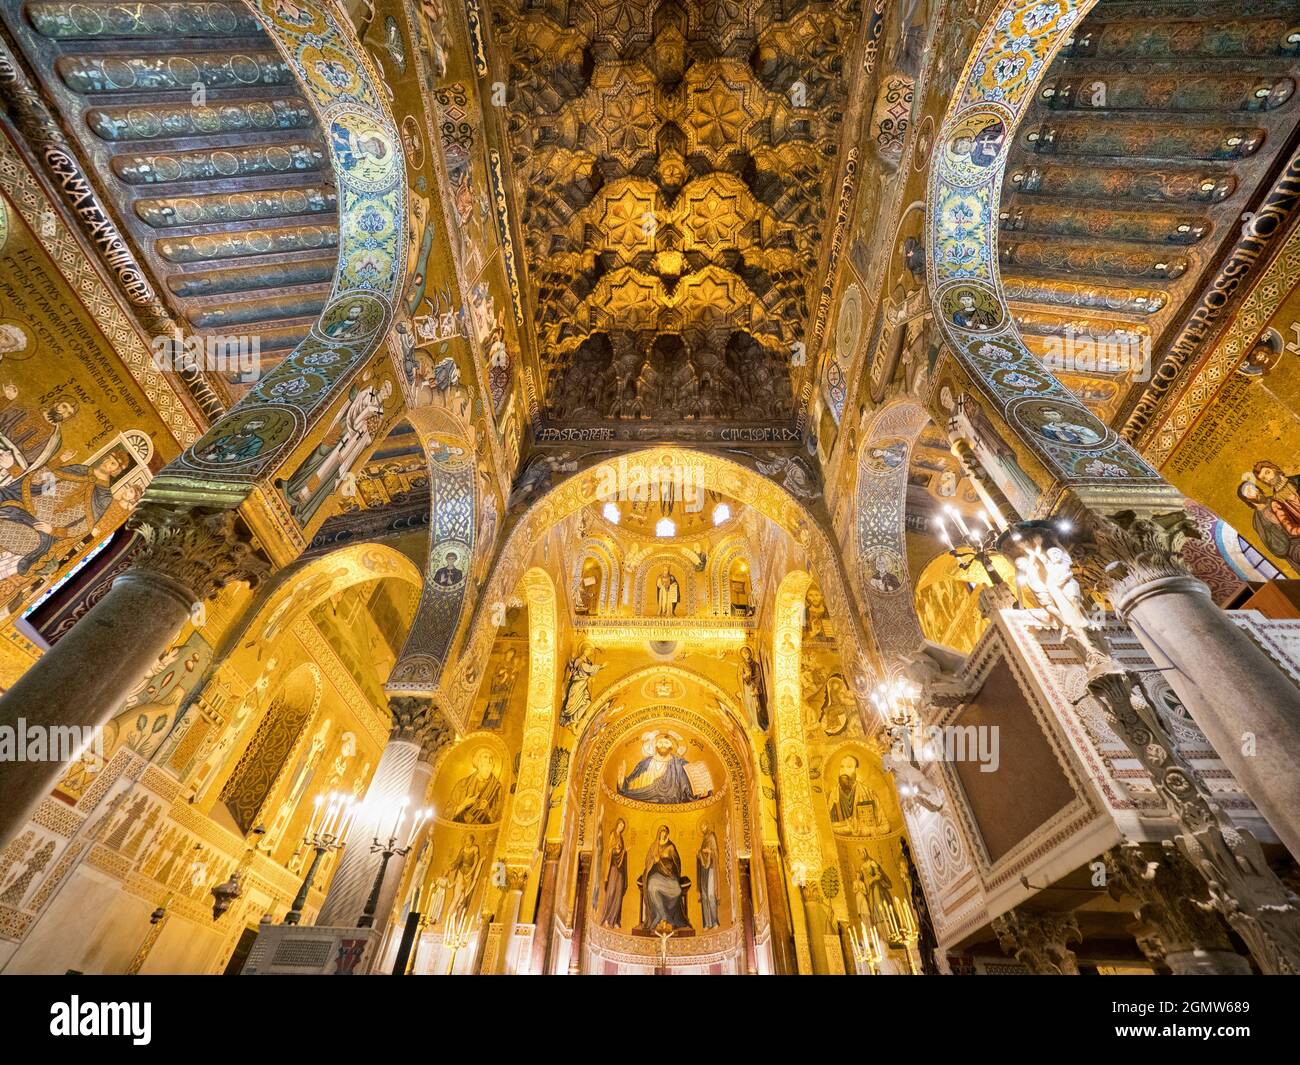 Palermo, Sicily, Italy - 23 September 2019   The Palatine Chapel (Cappella Palatina), is the royal chapel of the Norman kings of Sicily in Palermo, Si Stock Photo